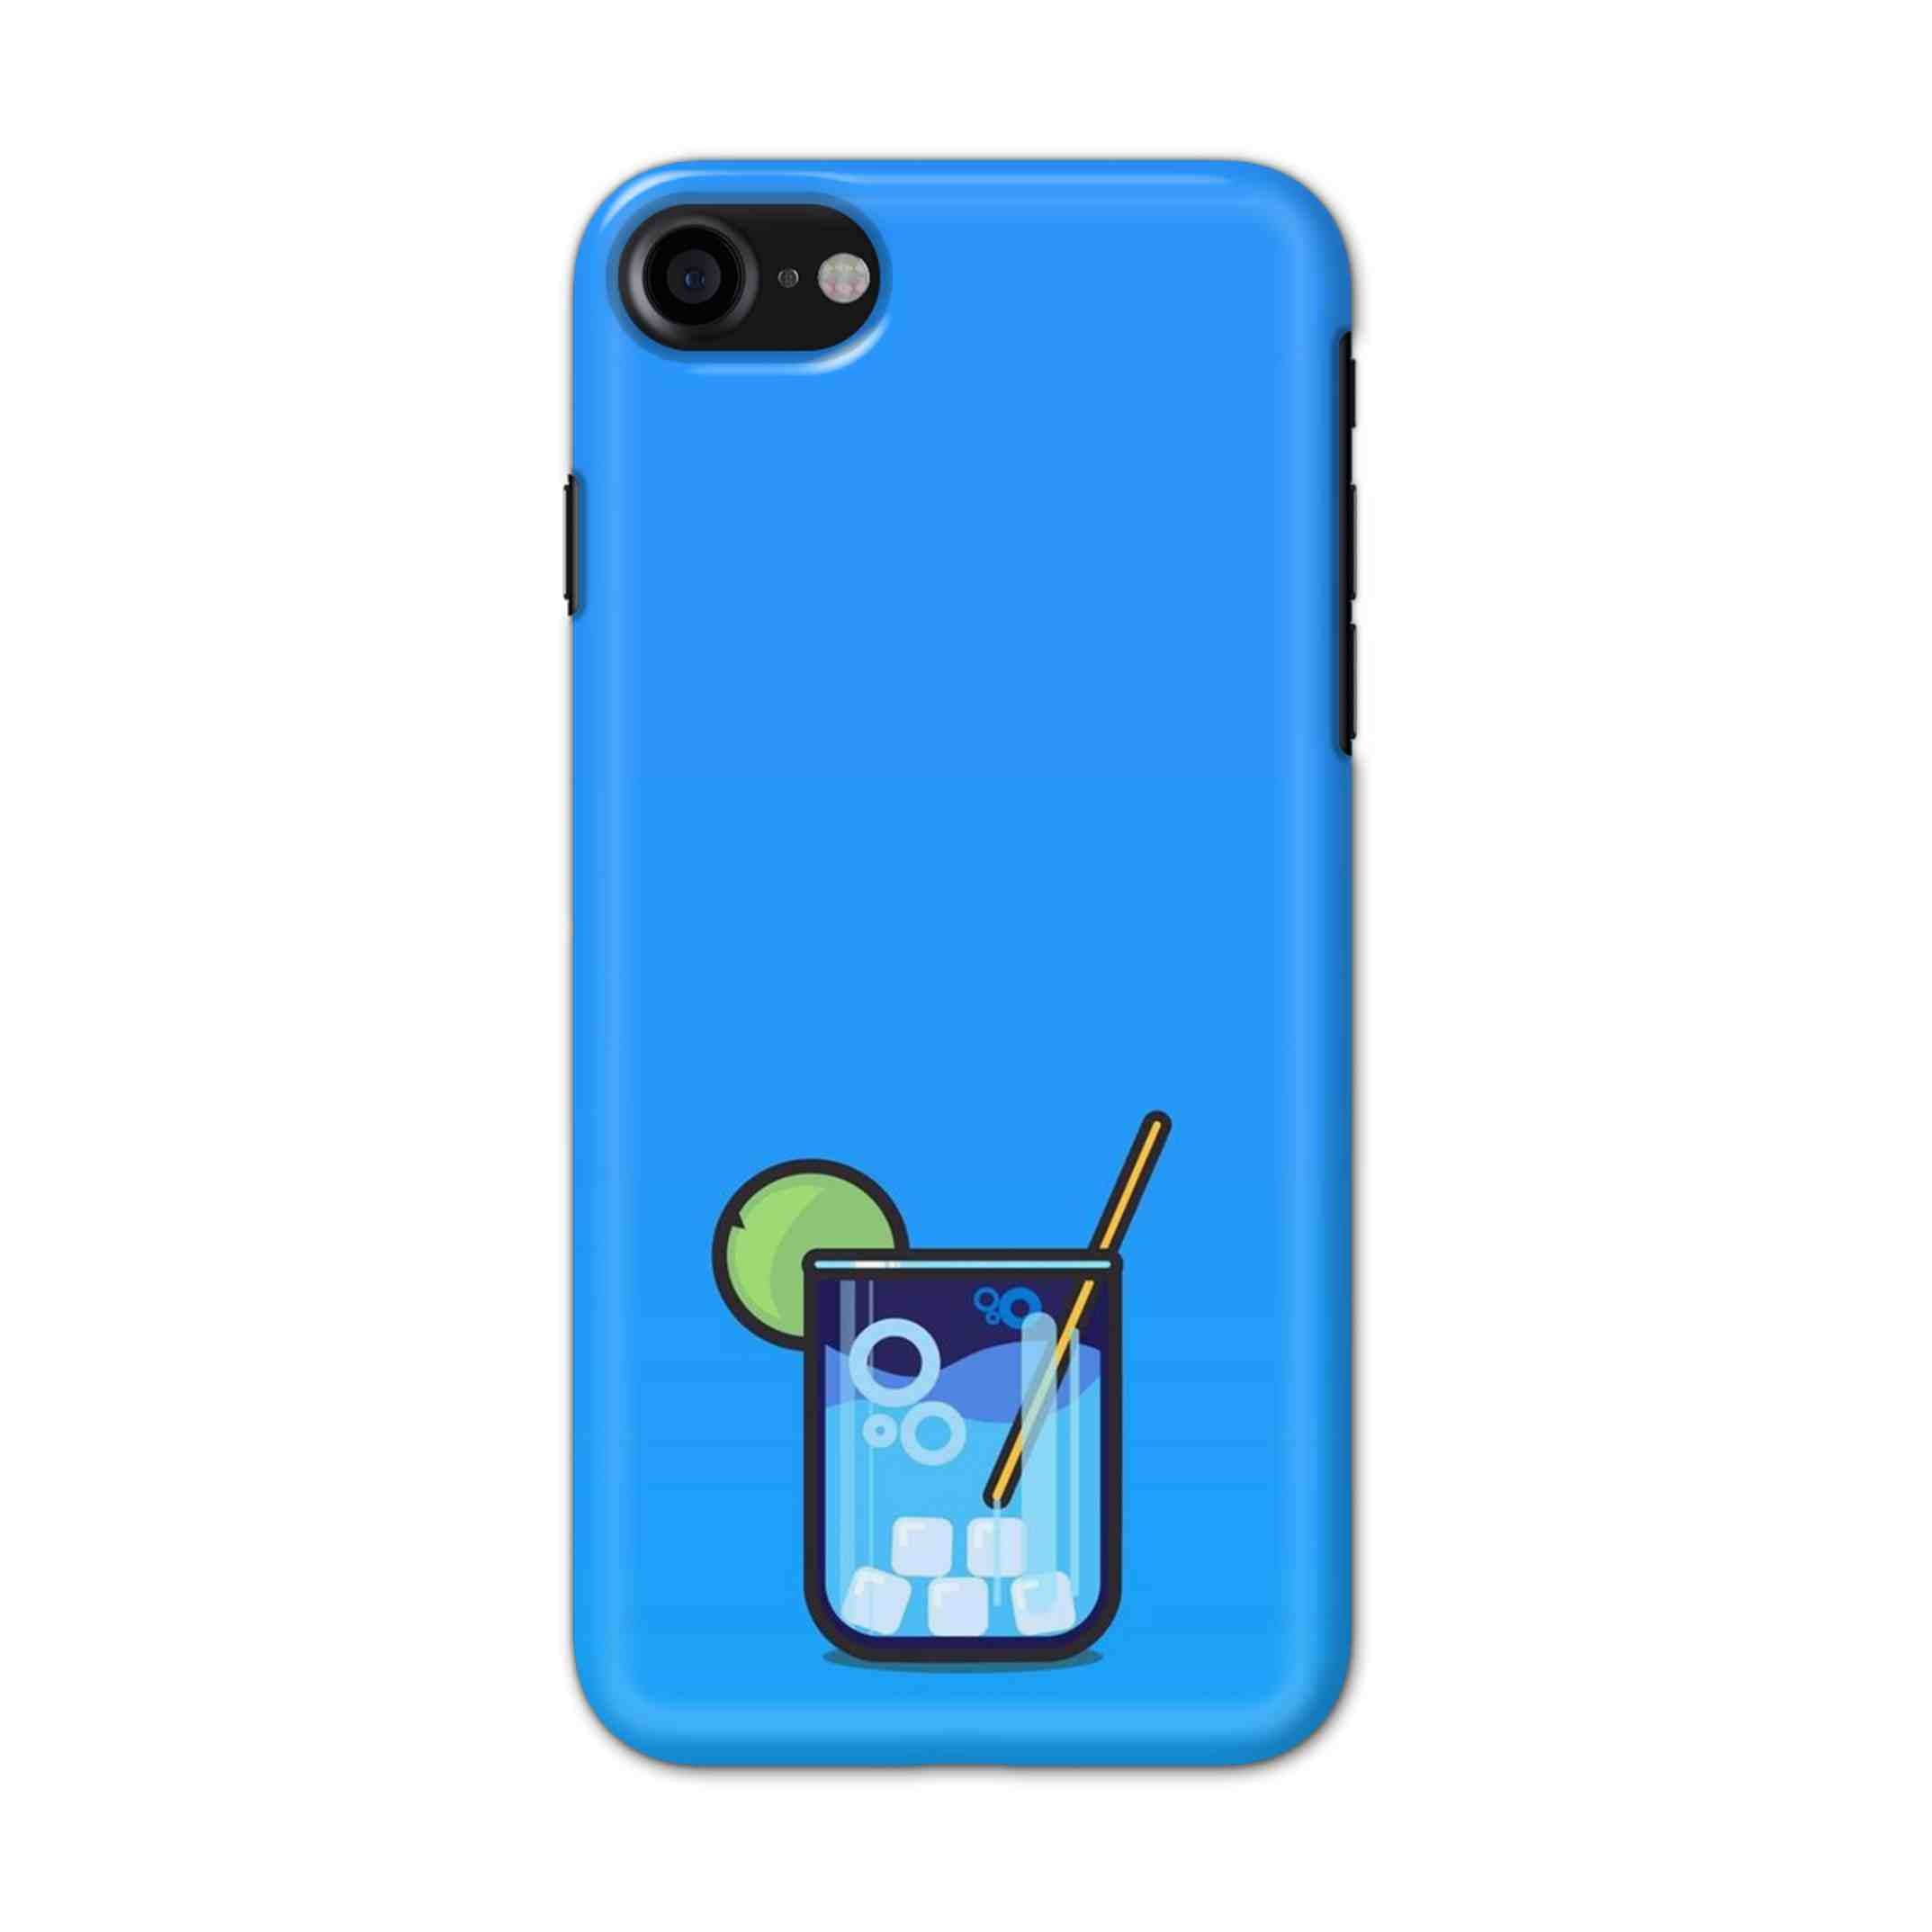 Buy Cup Ice Cube Hard Back Mobile Phone Case/Cover For iPhone 7 / 8 Online